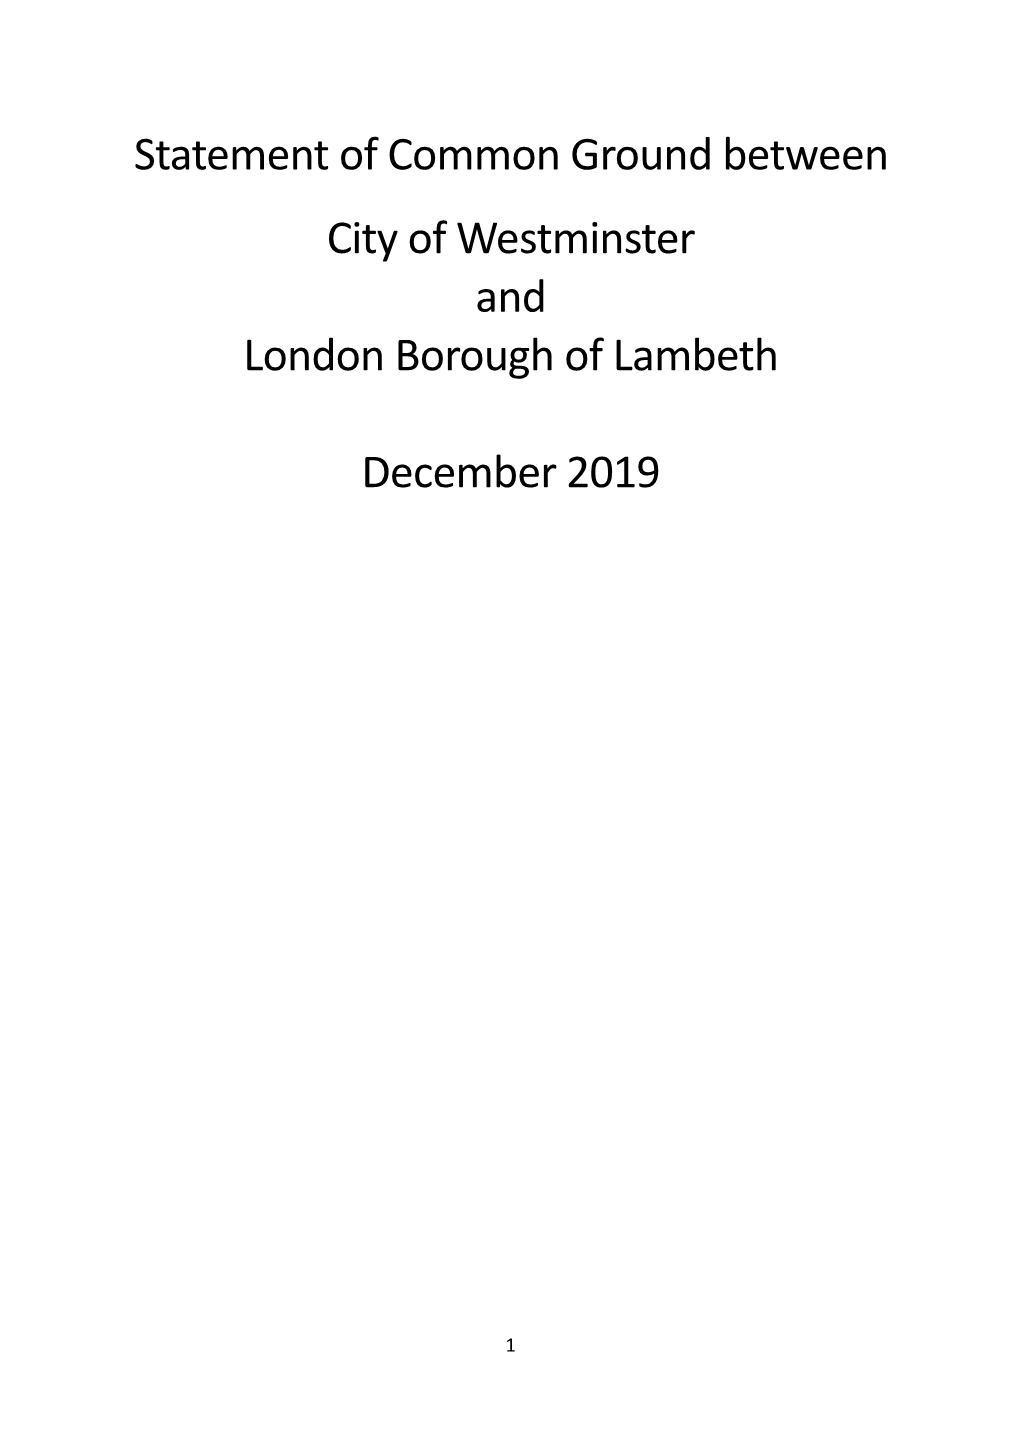 Statement of Common Ground Between City of Westminster and London Borough of Lambeth December 2019